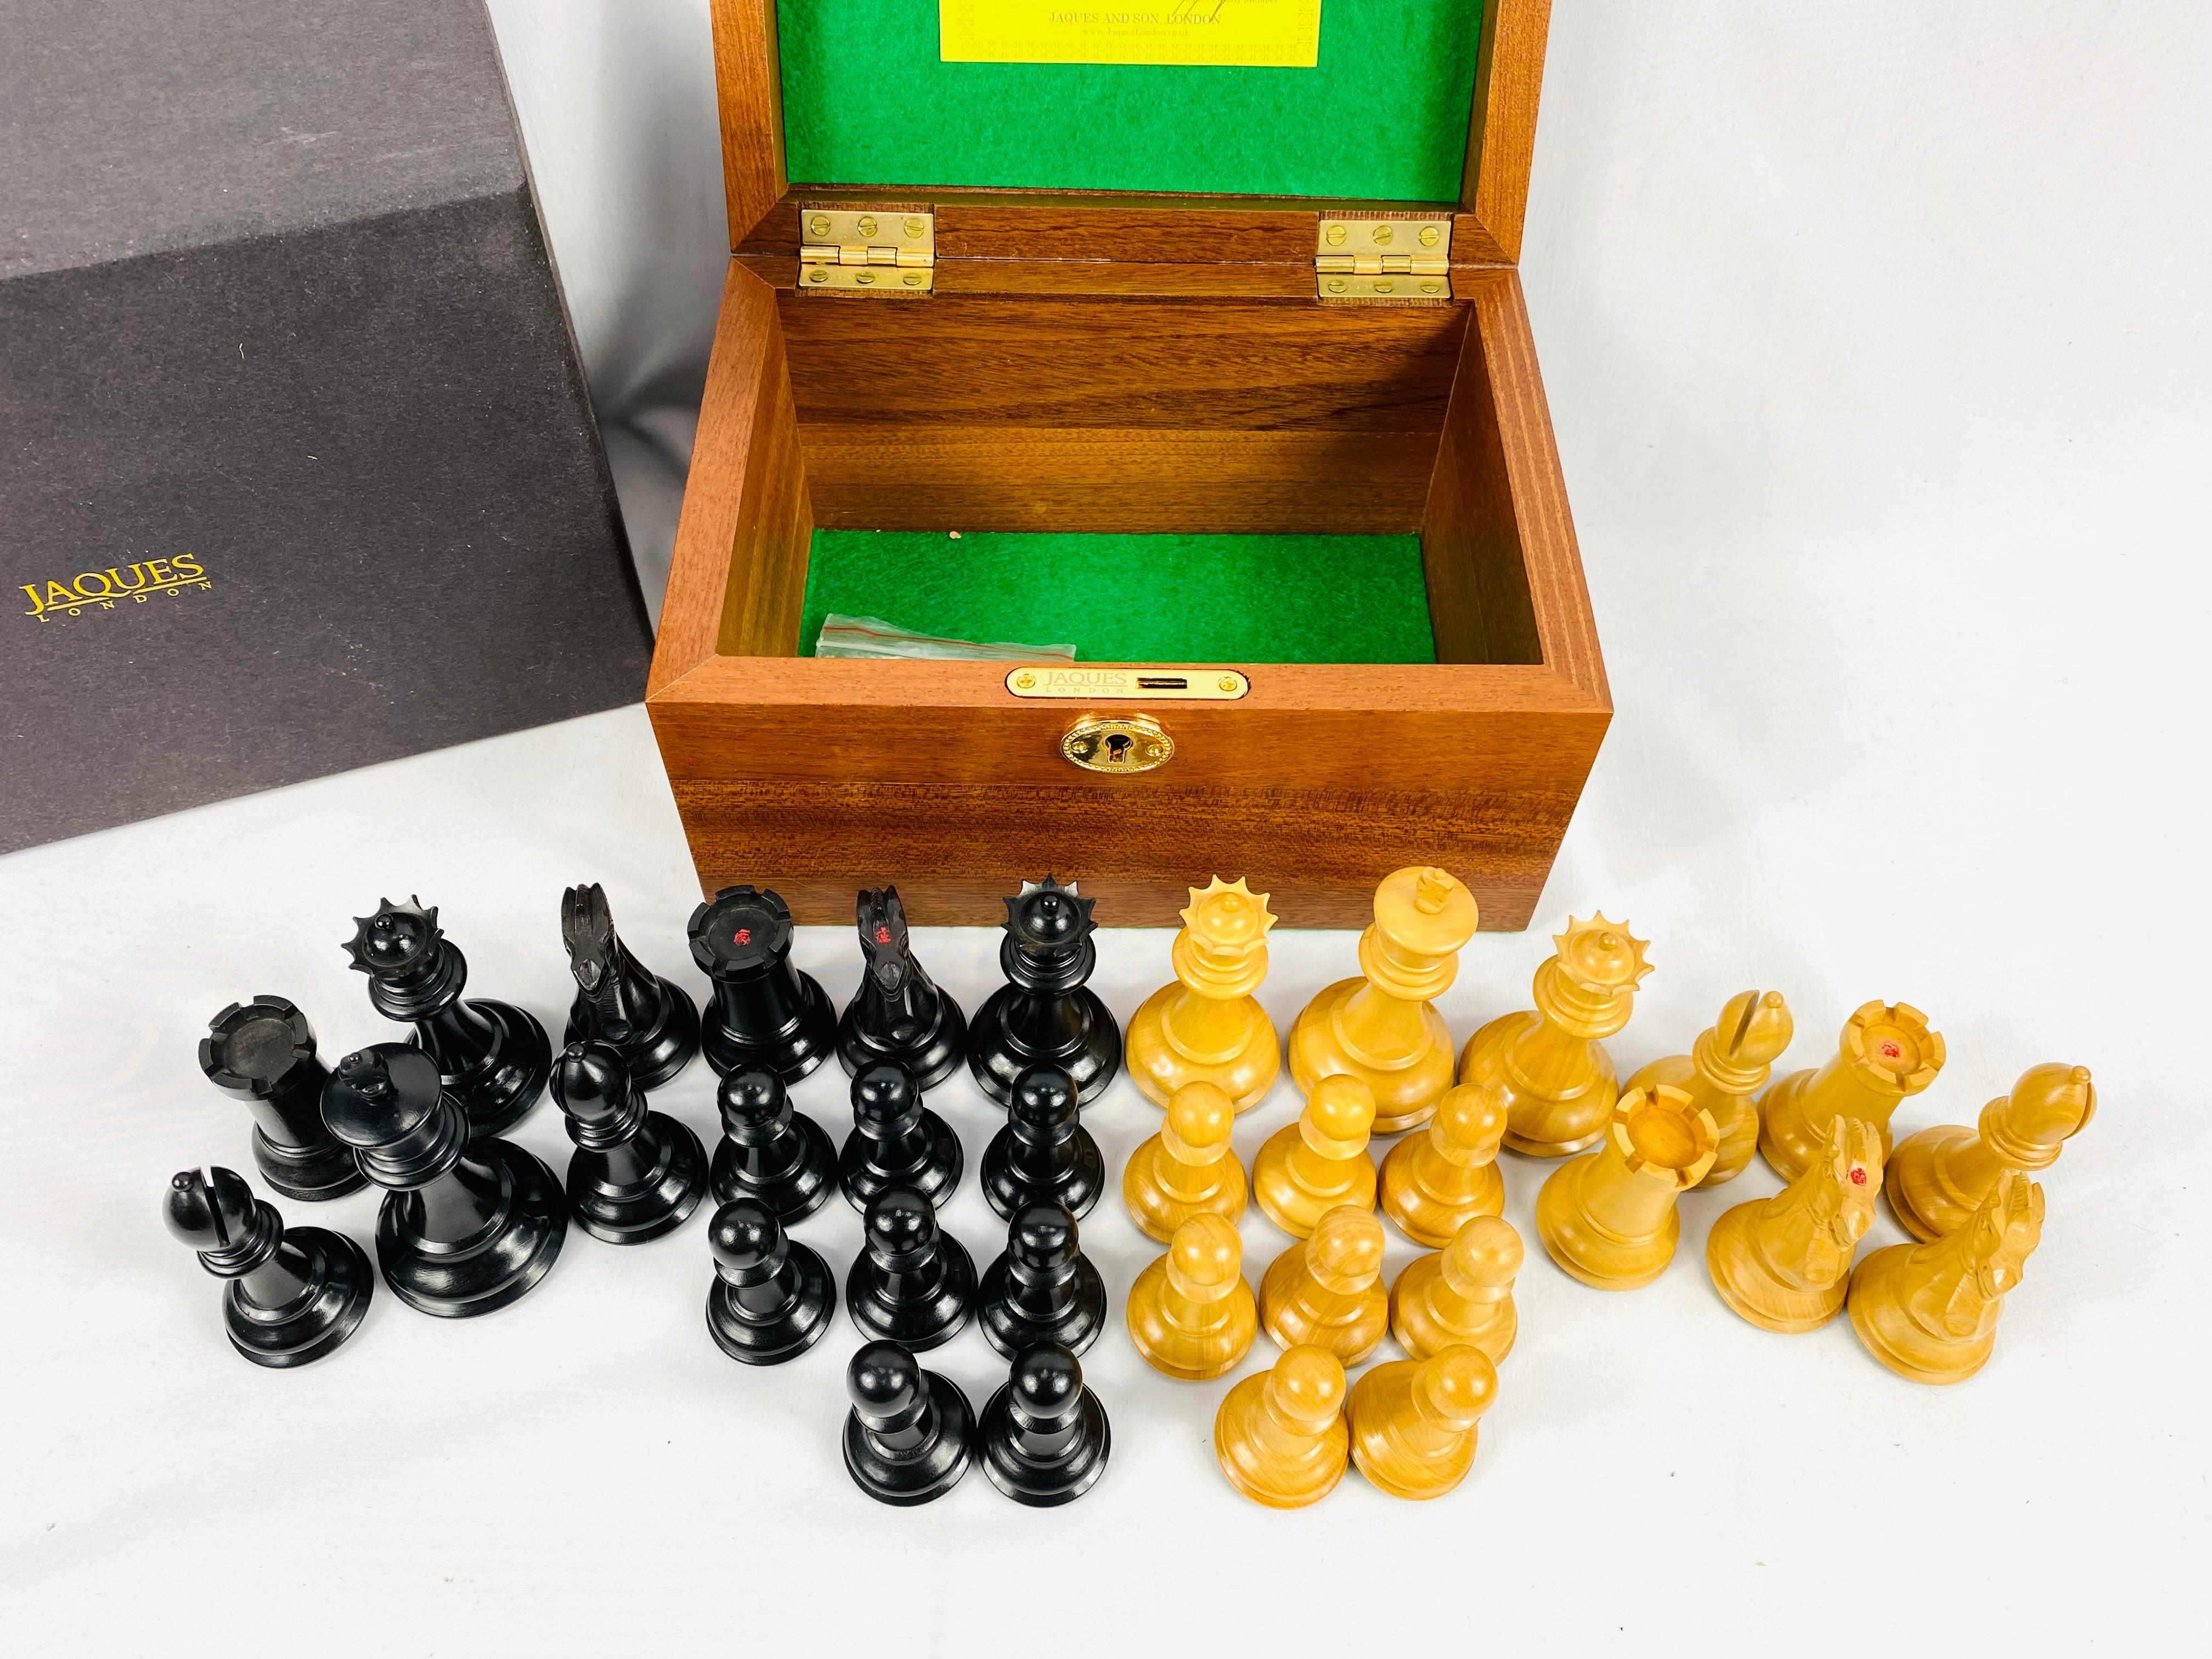 Jaques of London. Original Staunton limited edition chess set, no. 035184 (kings 9cm), in original box with key.
Staunton chess pieces are the most common and familiar pieces today. The pieces are named after the self-proclaimed world champion